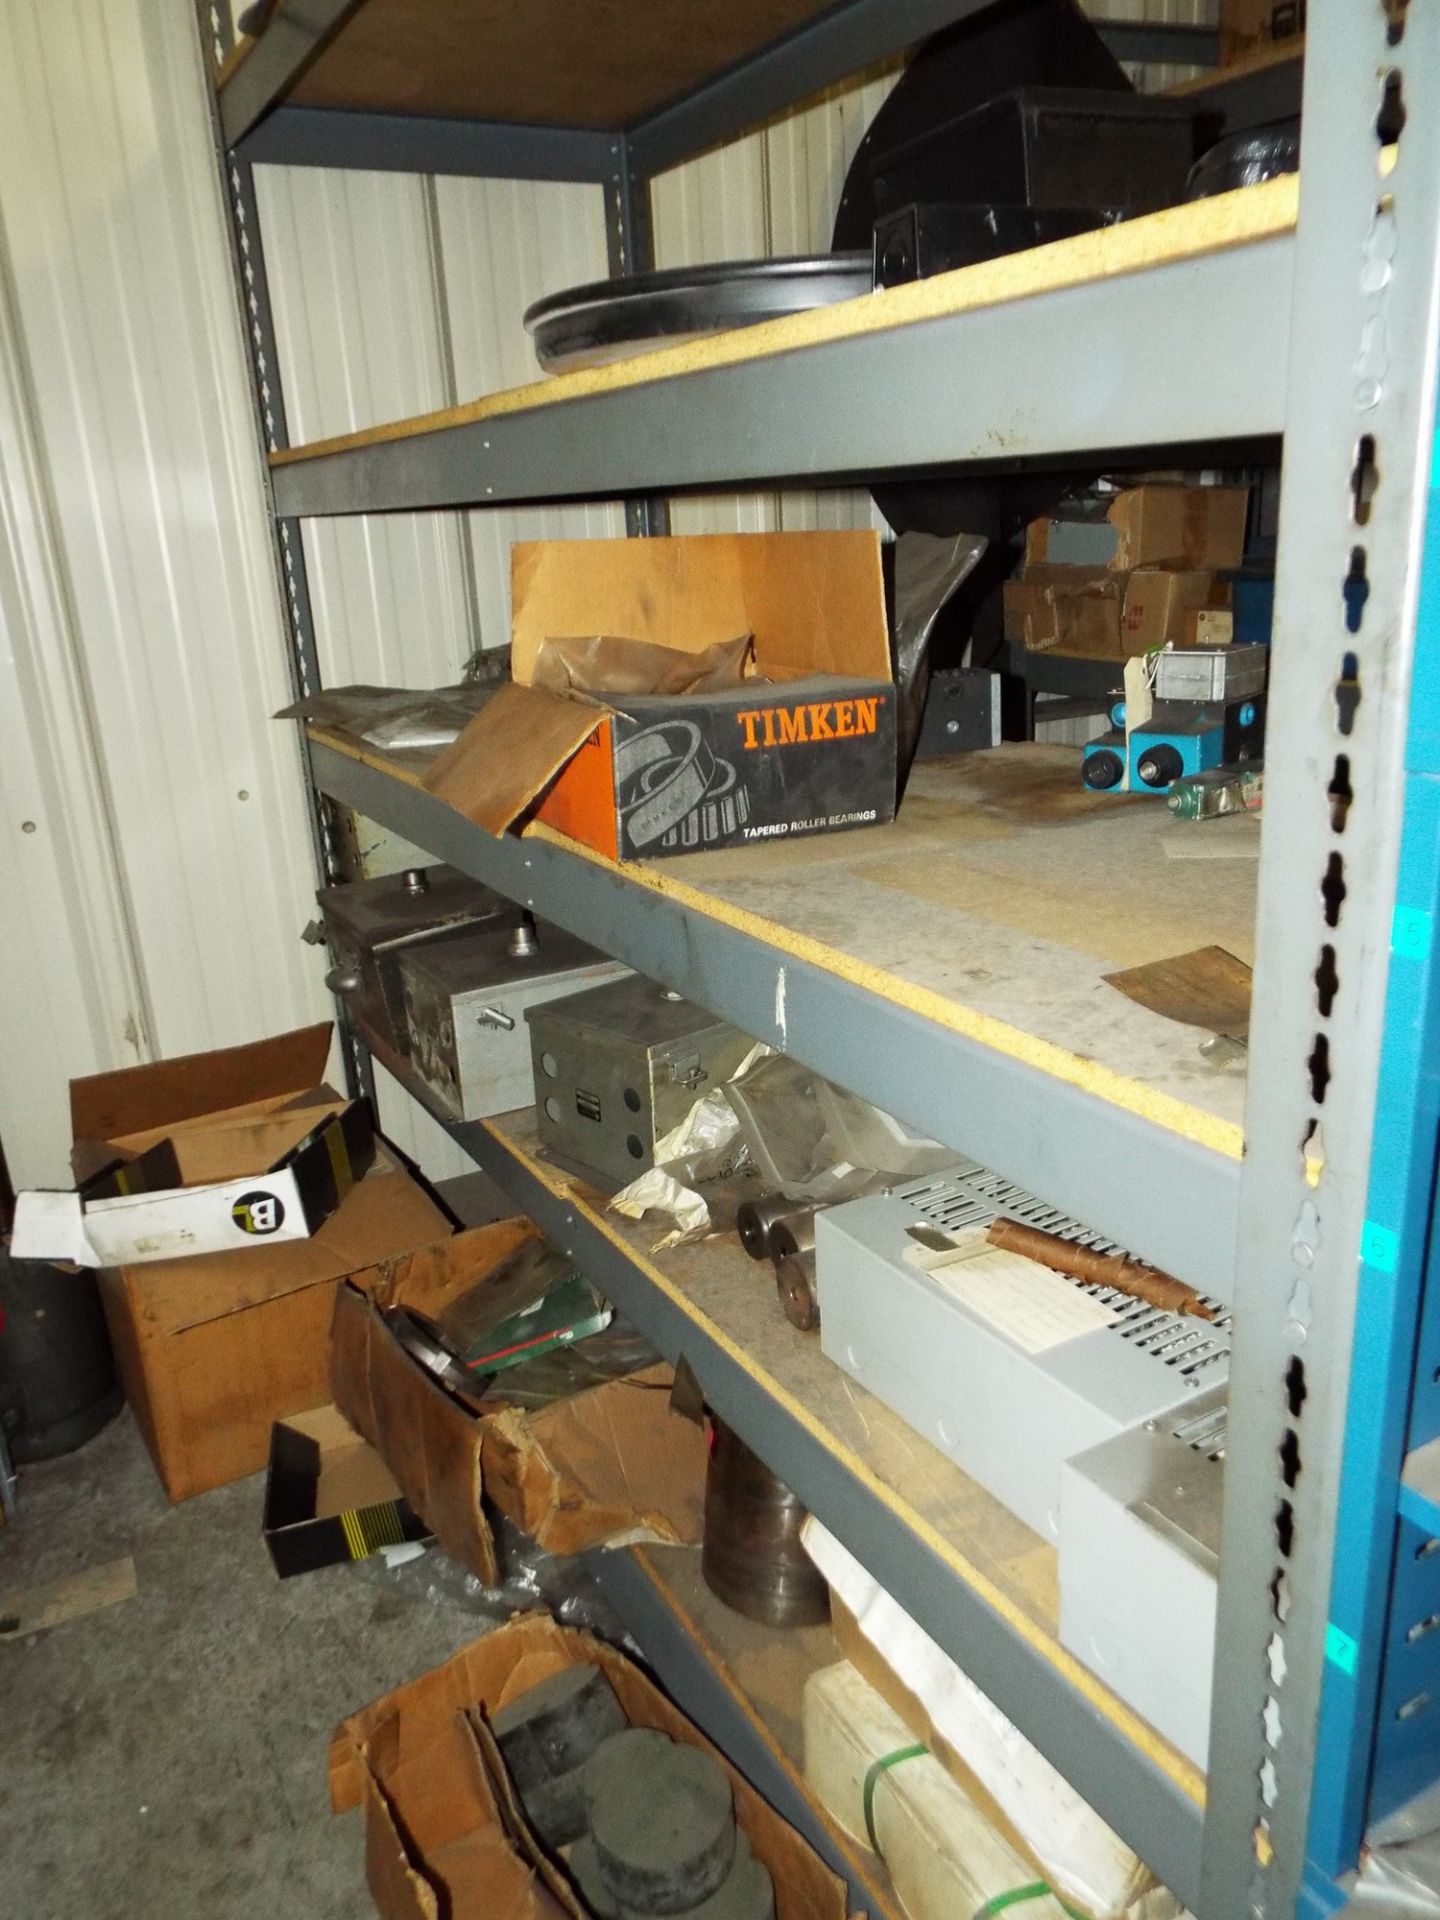 LOT/ SHELF WITH CONTENTS - BEARINGS, PLC COMPONENTS, GEARS, BELTS, CONTROL BOXES, SPARE PARTS - Image 3 of 4